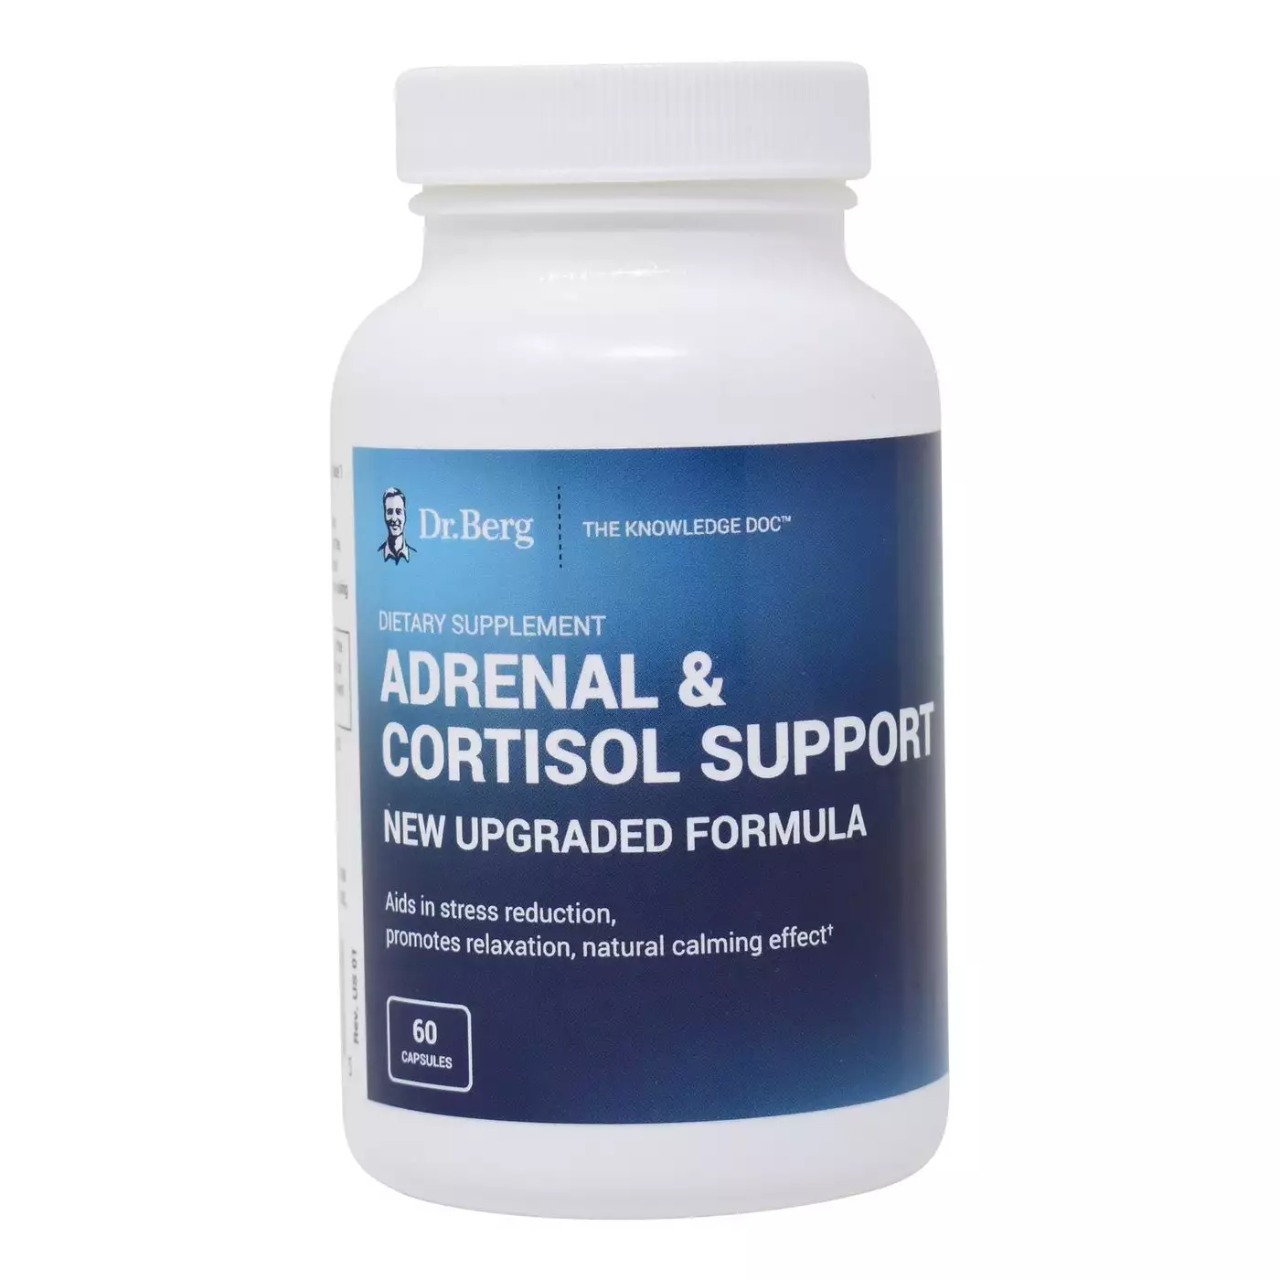 Dr.Berg Adrenal and Cortisol Support, 60 Veggie Capsules